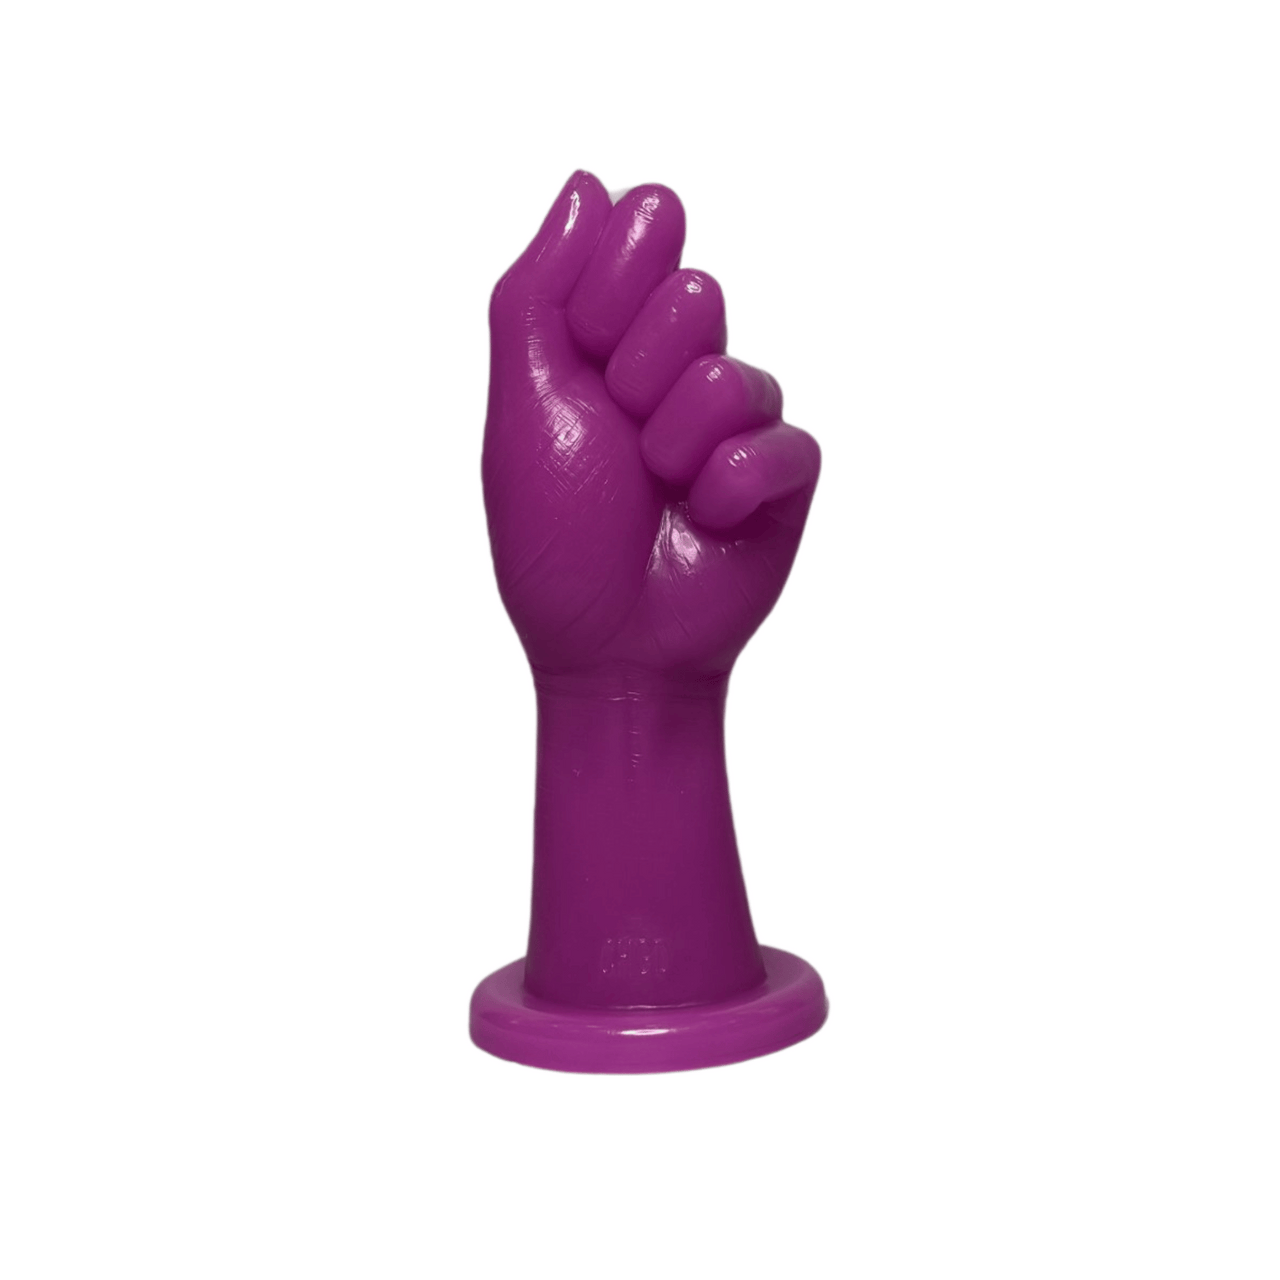 Life-Size Flexible Silicone Fist Sculpture with Suction Cup Base Realistic Erotic Décor Masterpiece